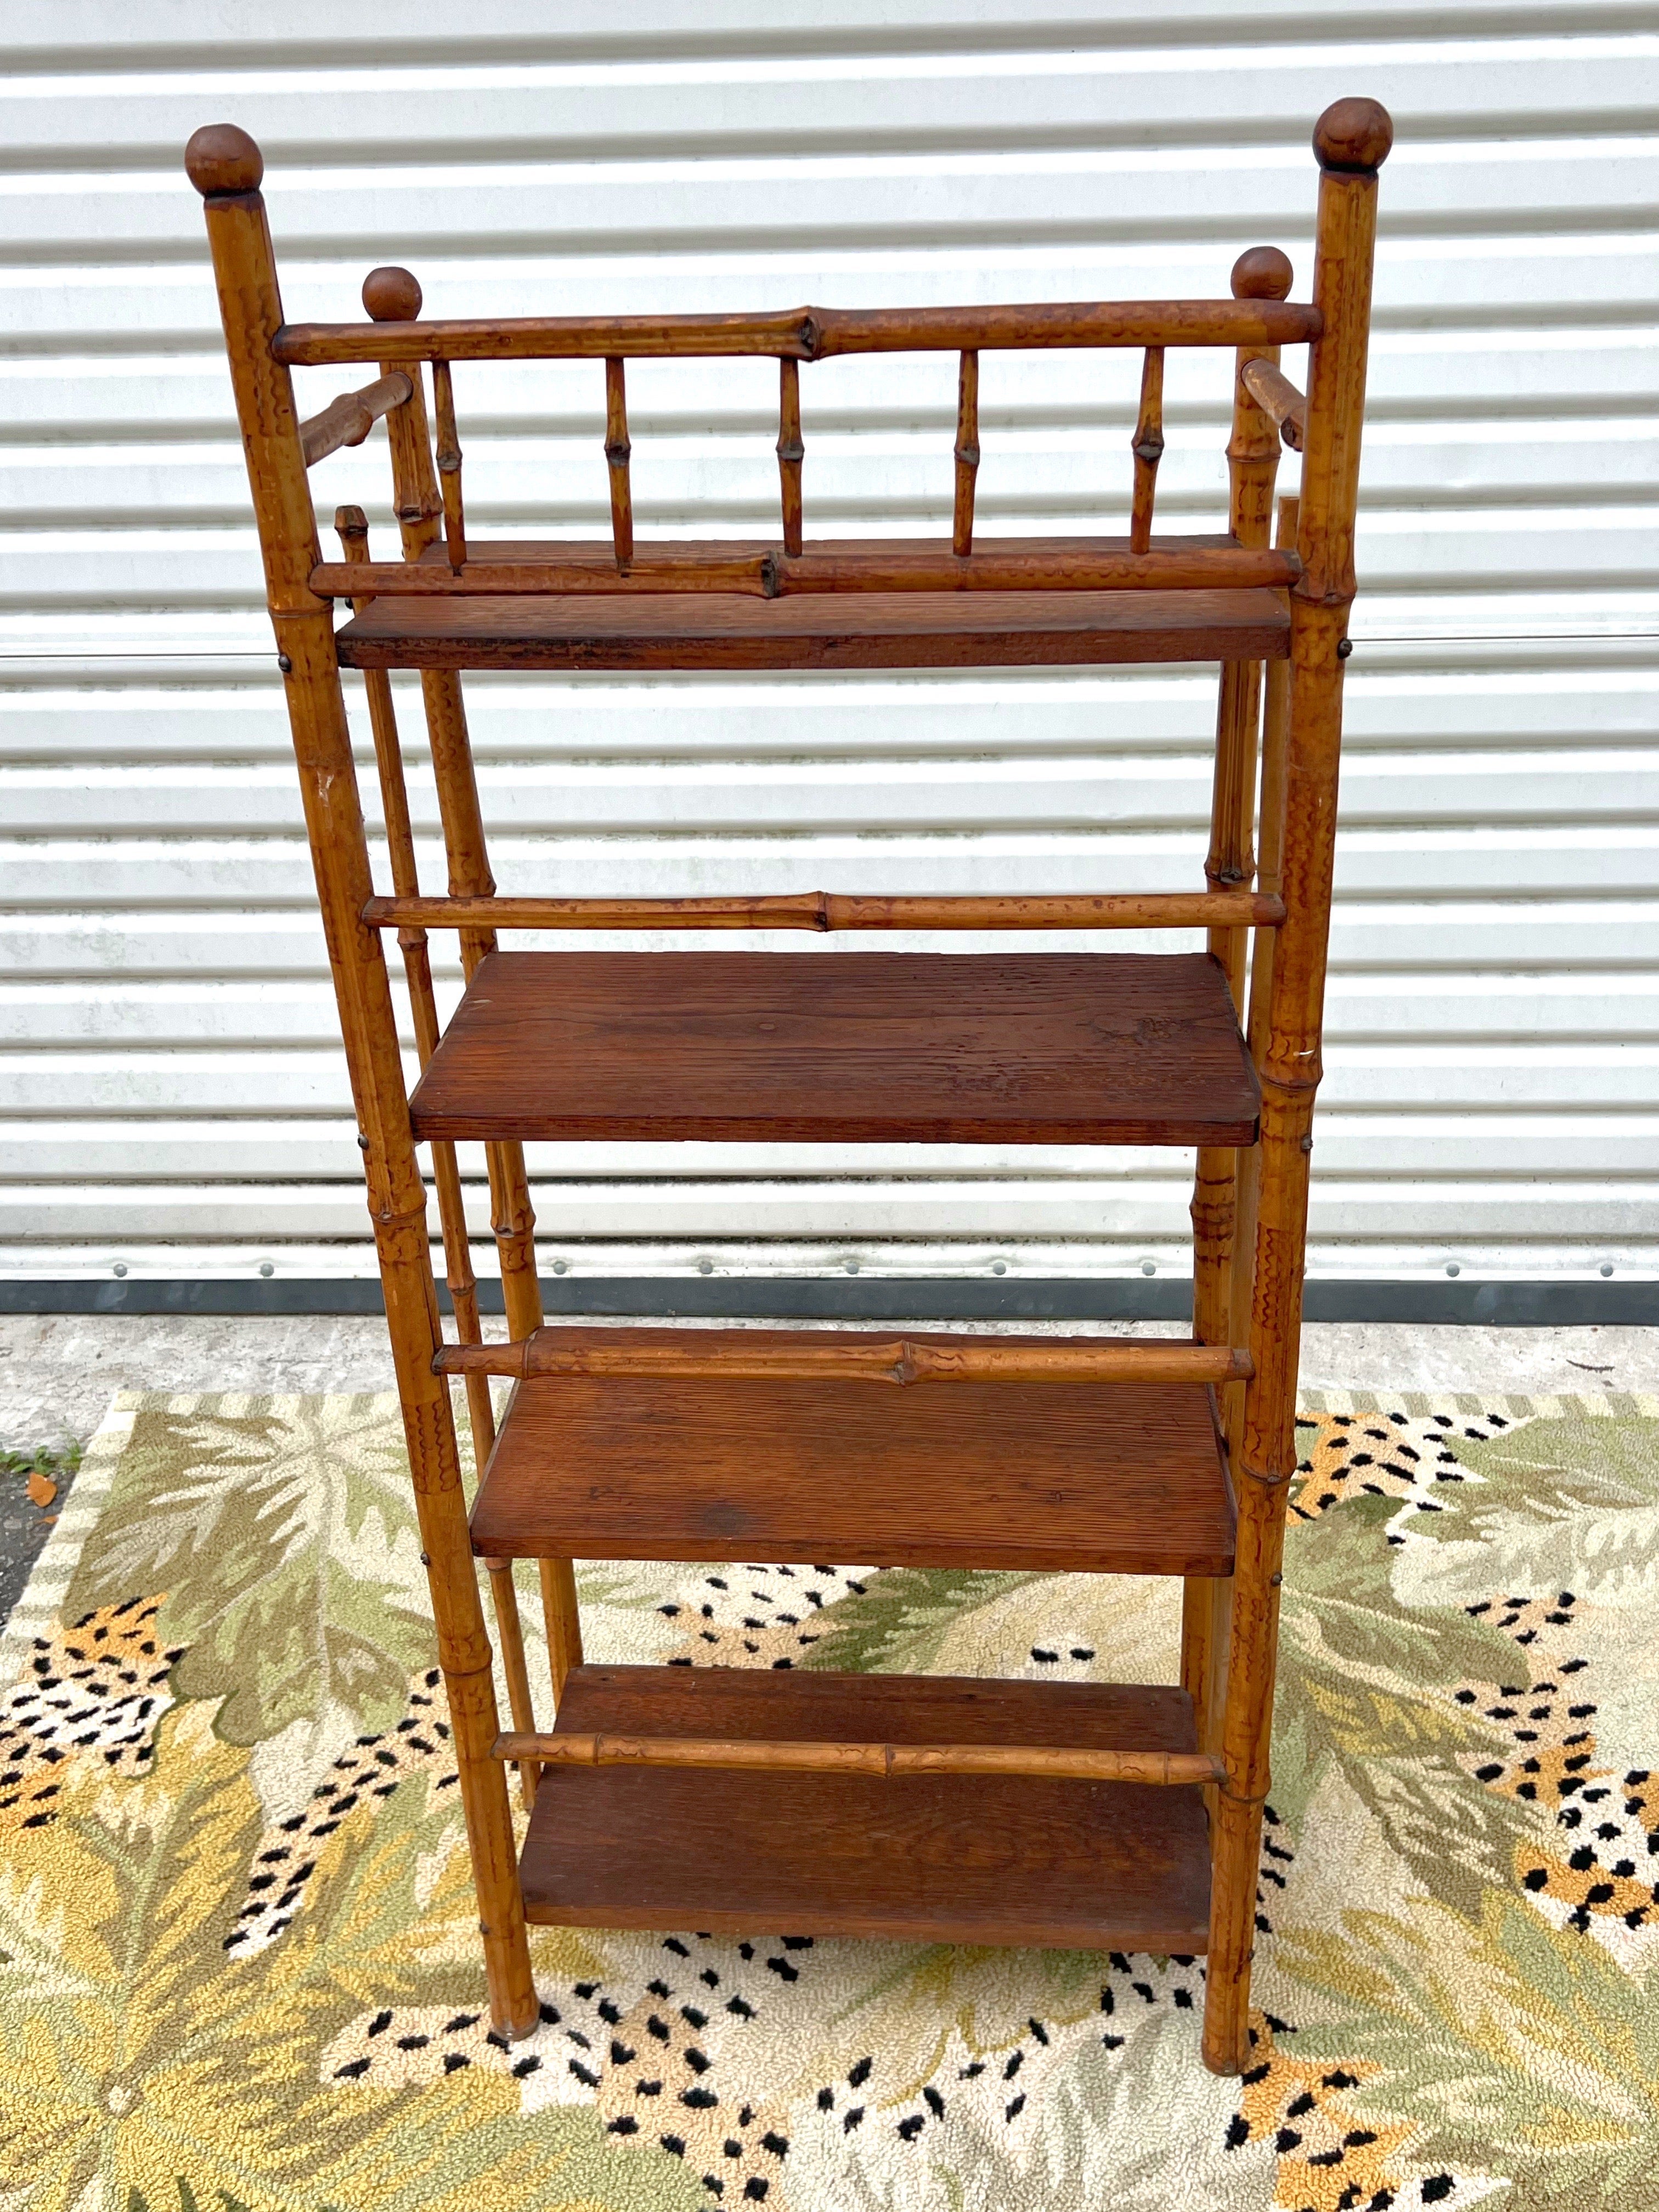 Antique bamboo etagere shelf stand. The Victorian era stand features a bamboo frame with four wood shelves.
Around late 19th century to early 20th century